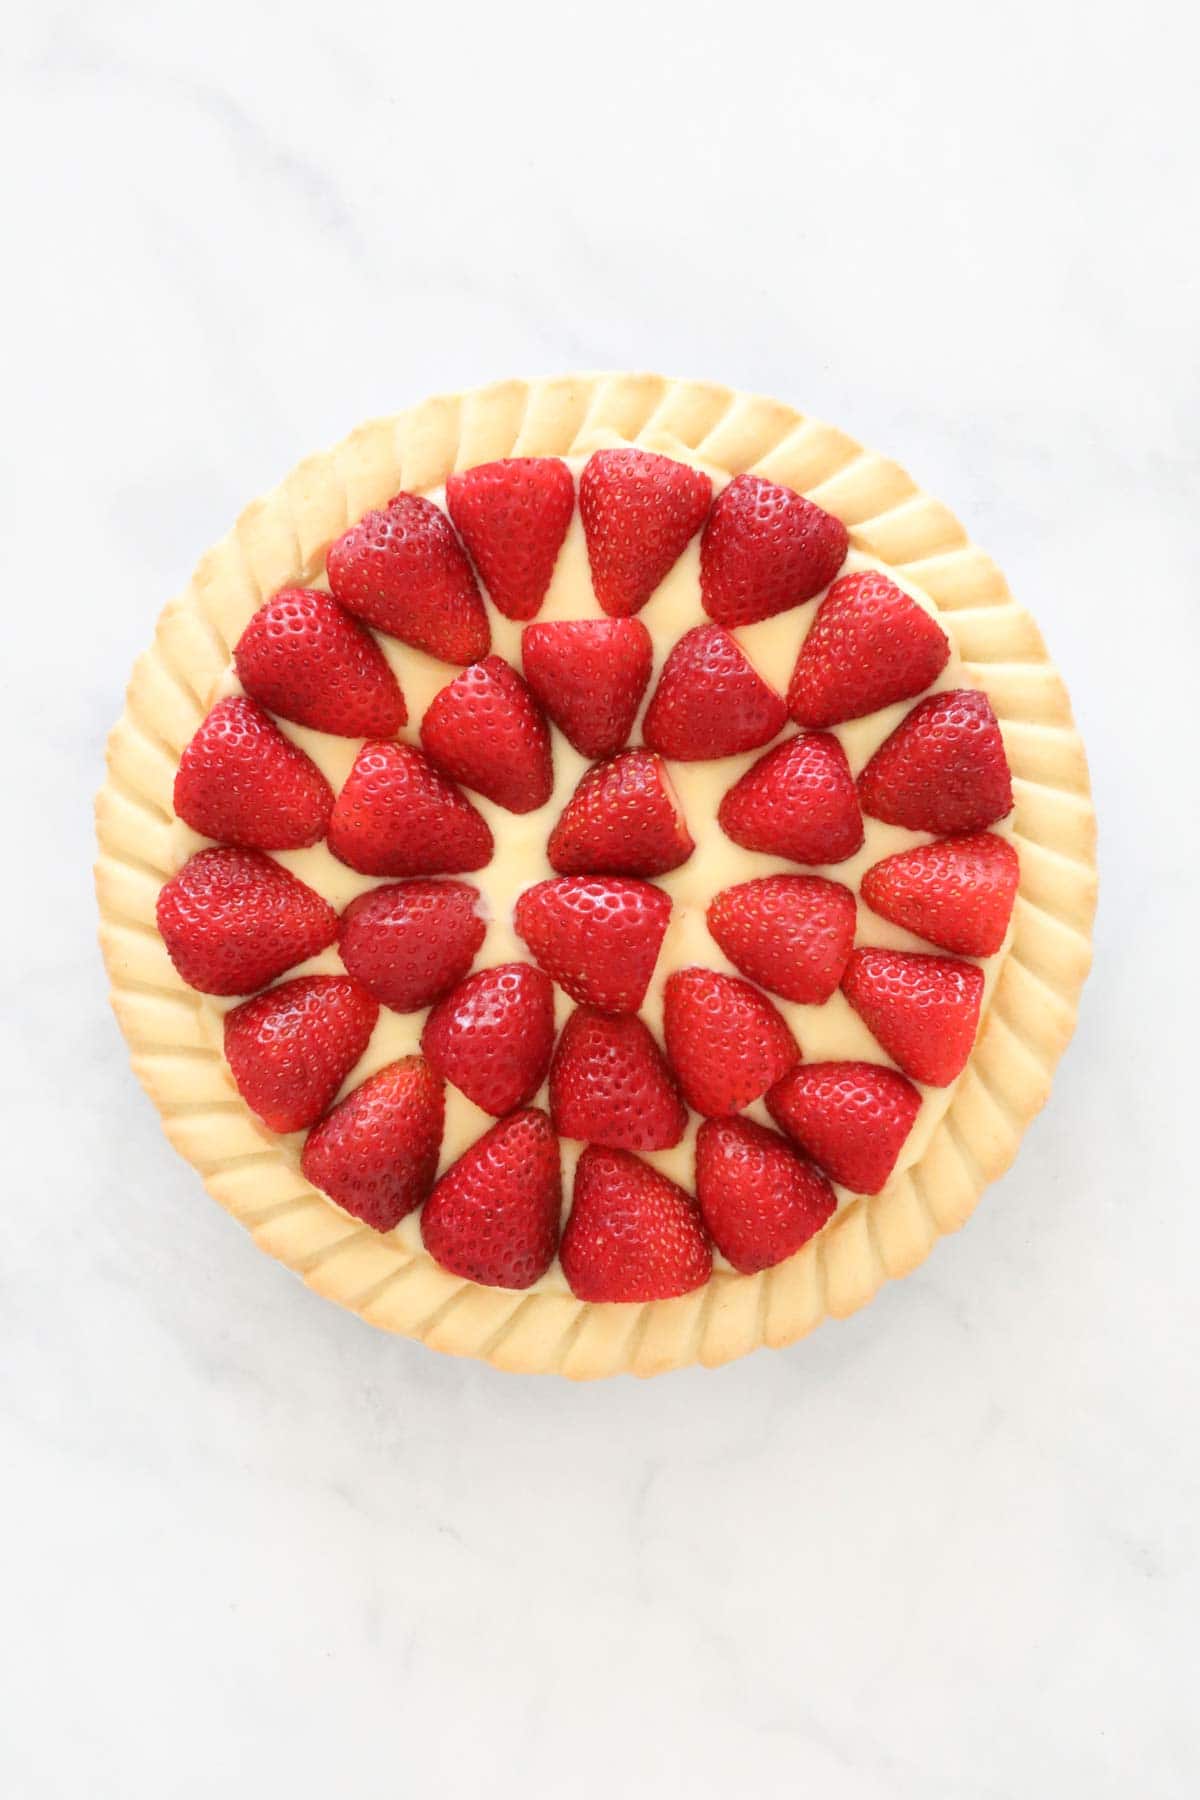 Strawberry halves arranged on top of the custard in the pastry case.